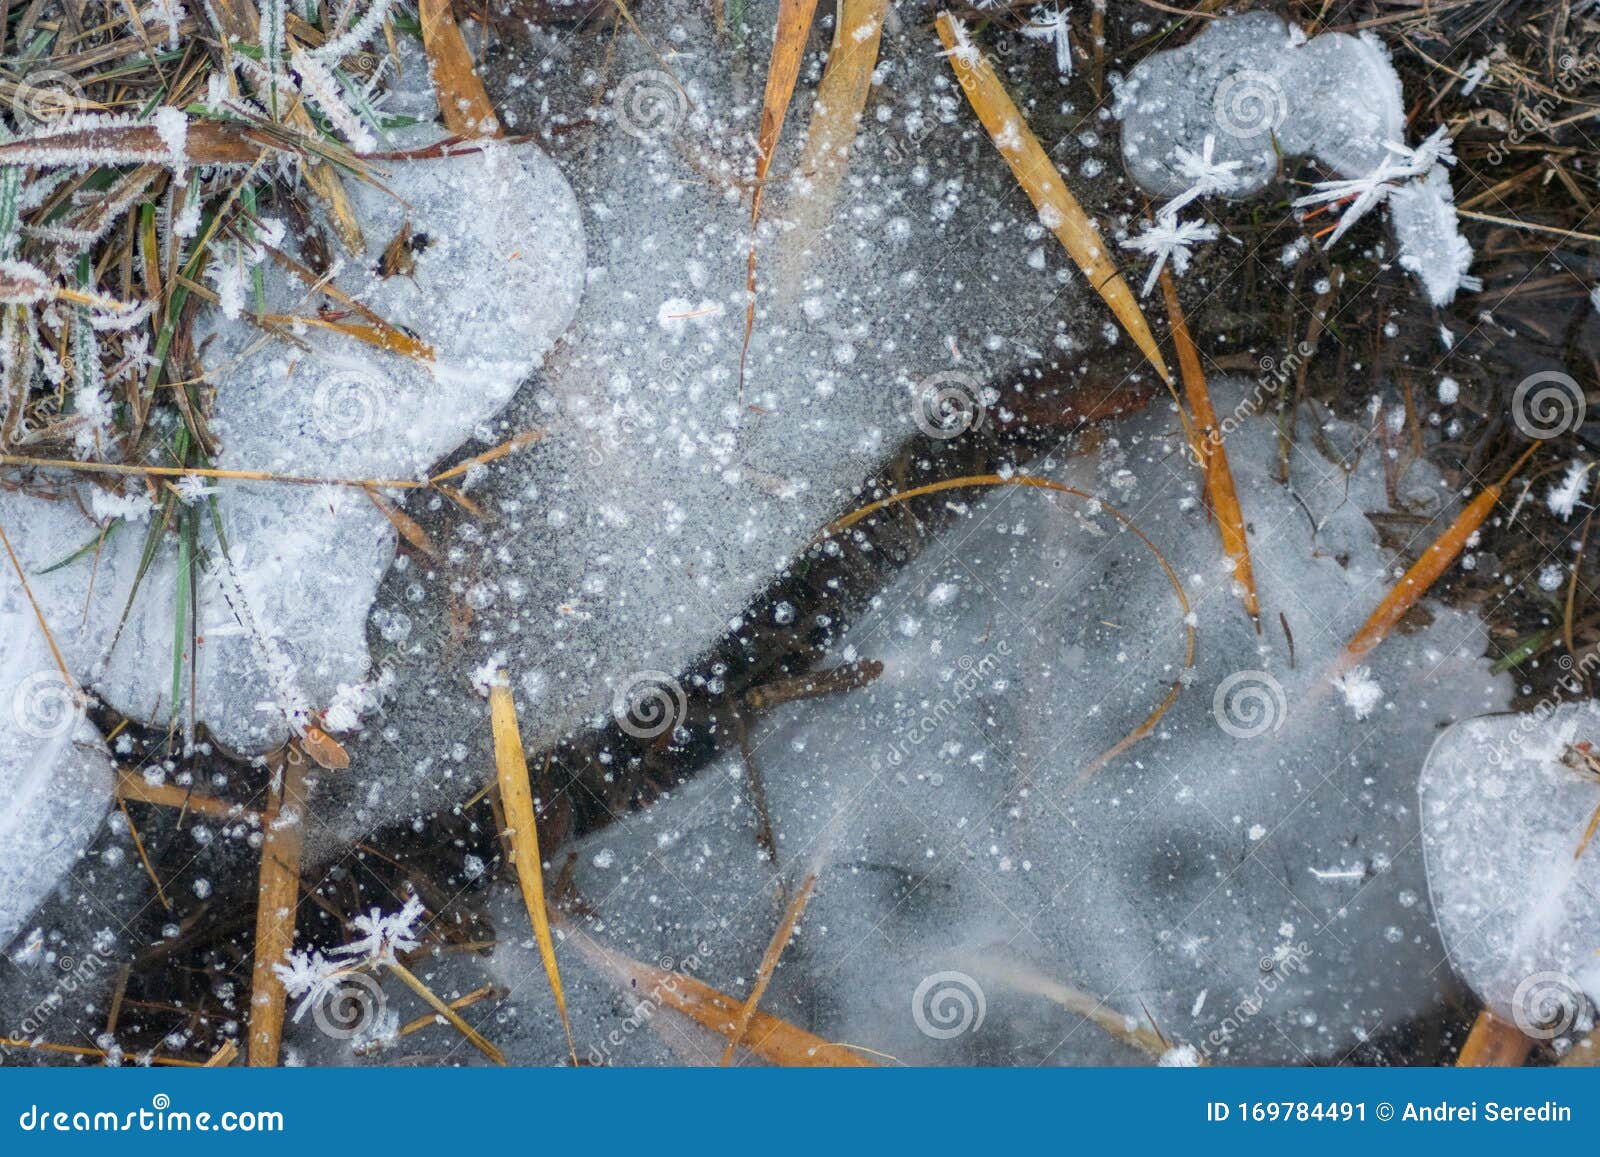 frozen grass on a winter morning: frost macro photography, ice fractal formations over plants.